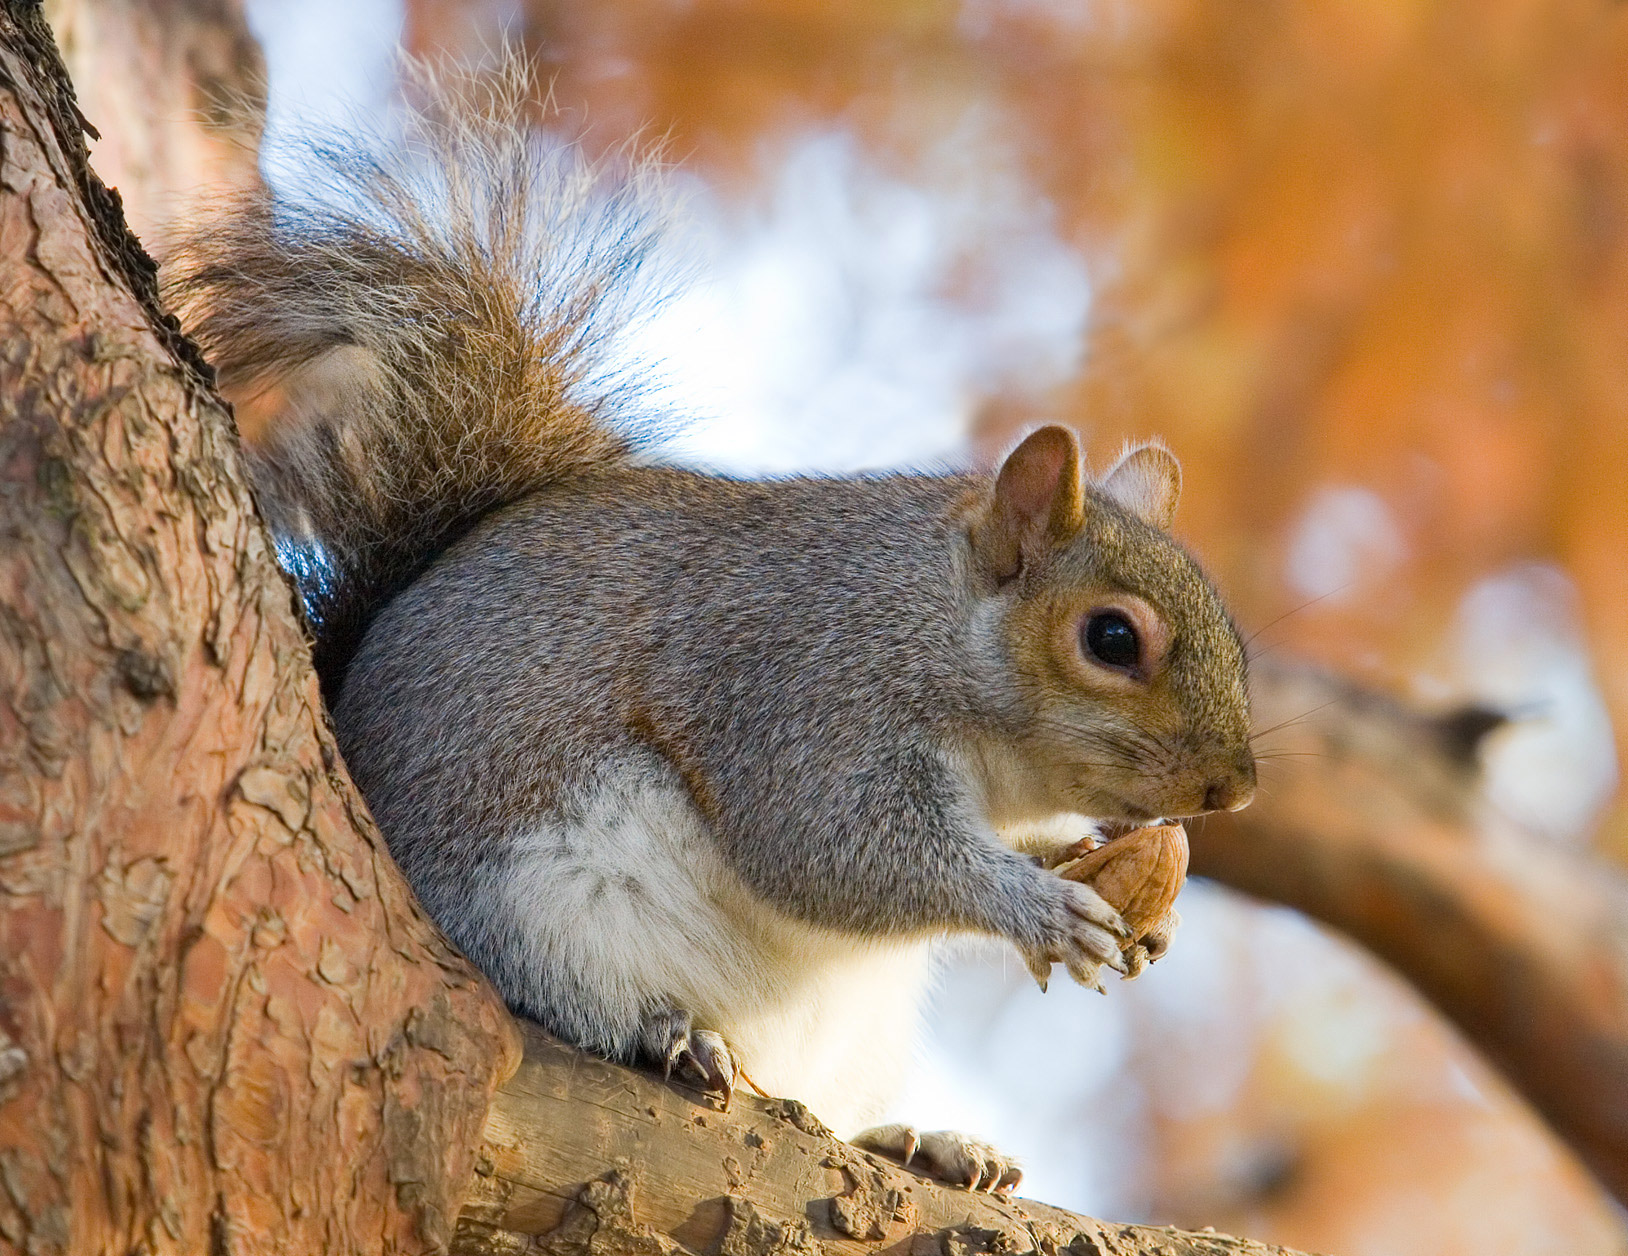 What is the scientific name for a tree squirrel?